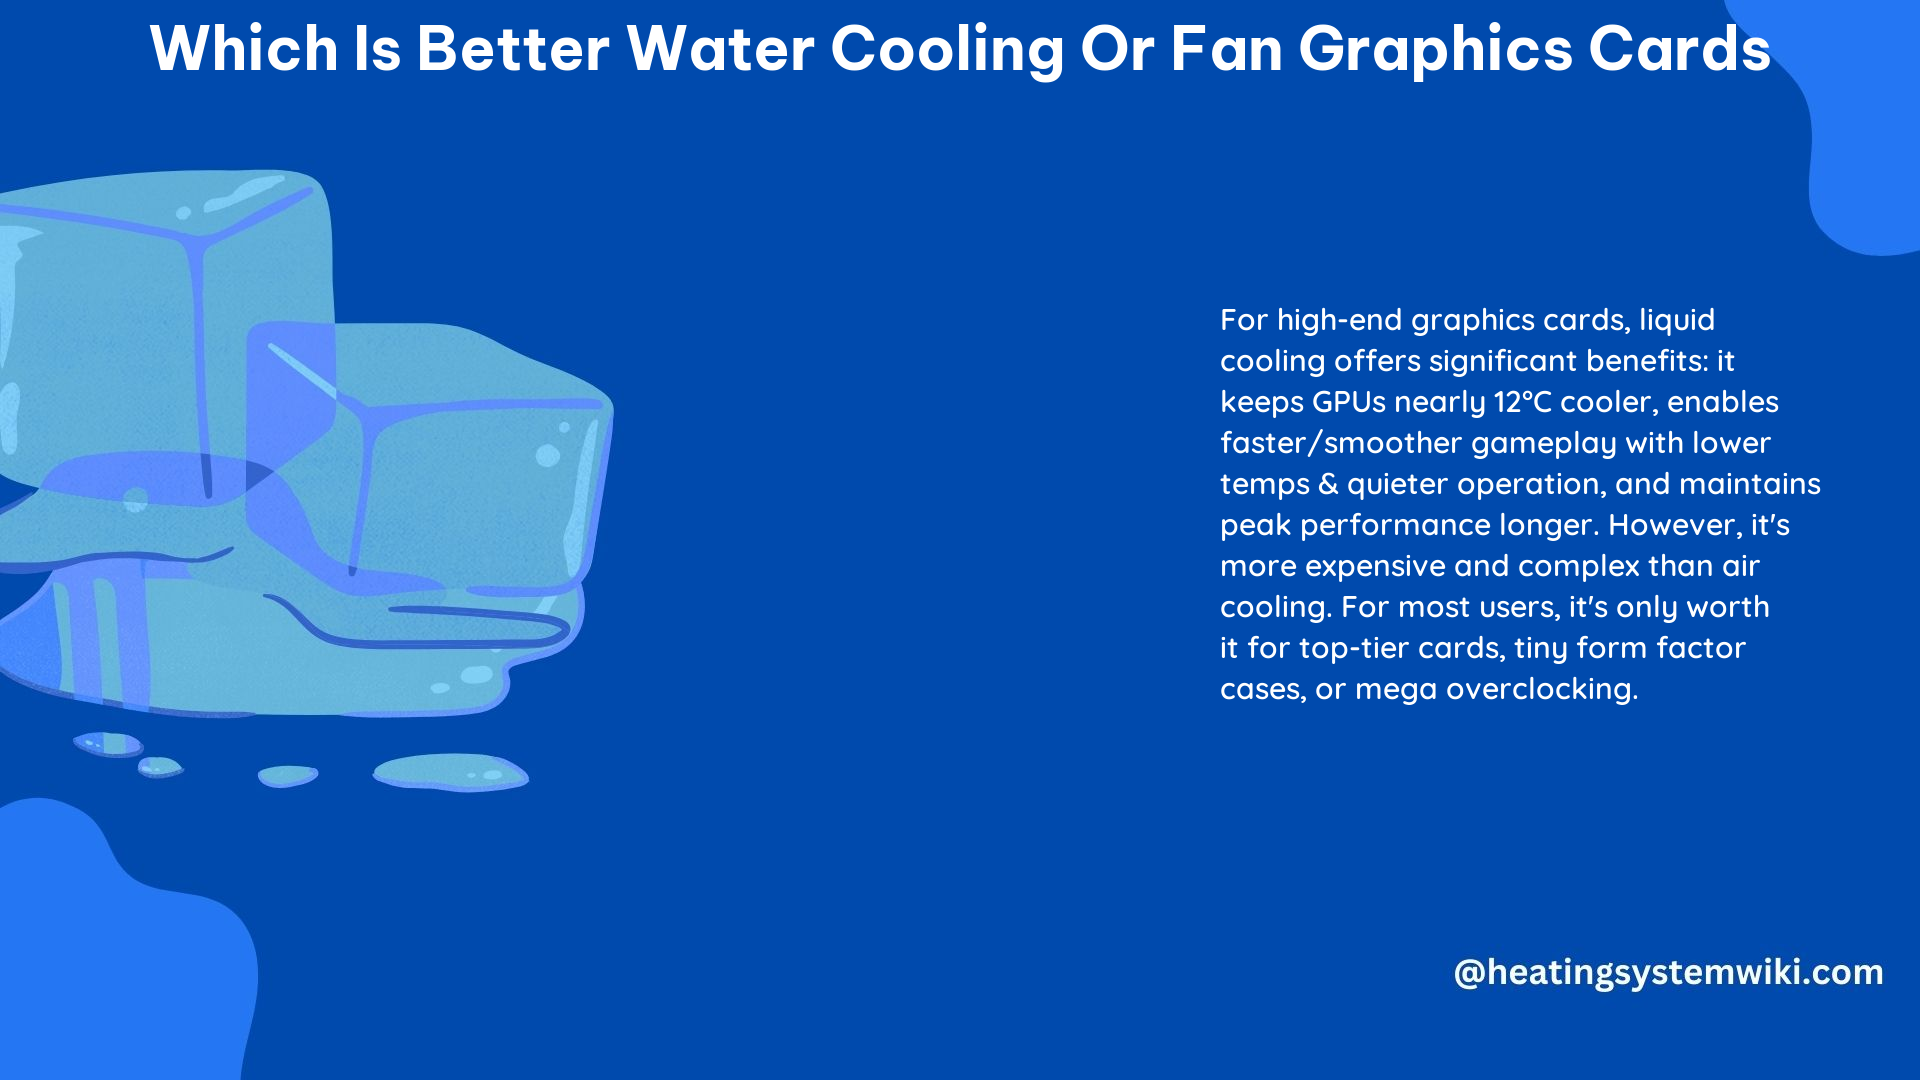 Which Is Better Water Cooling or Fan Graphics Cards